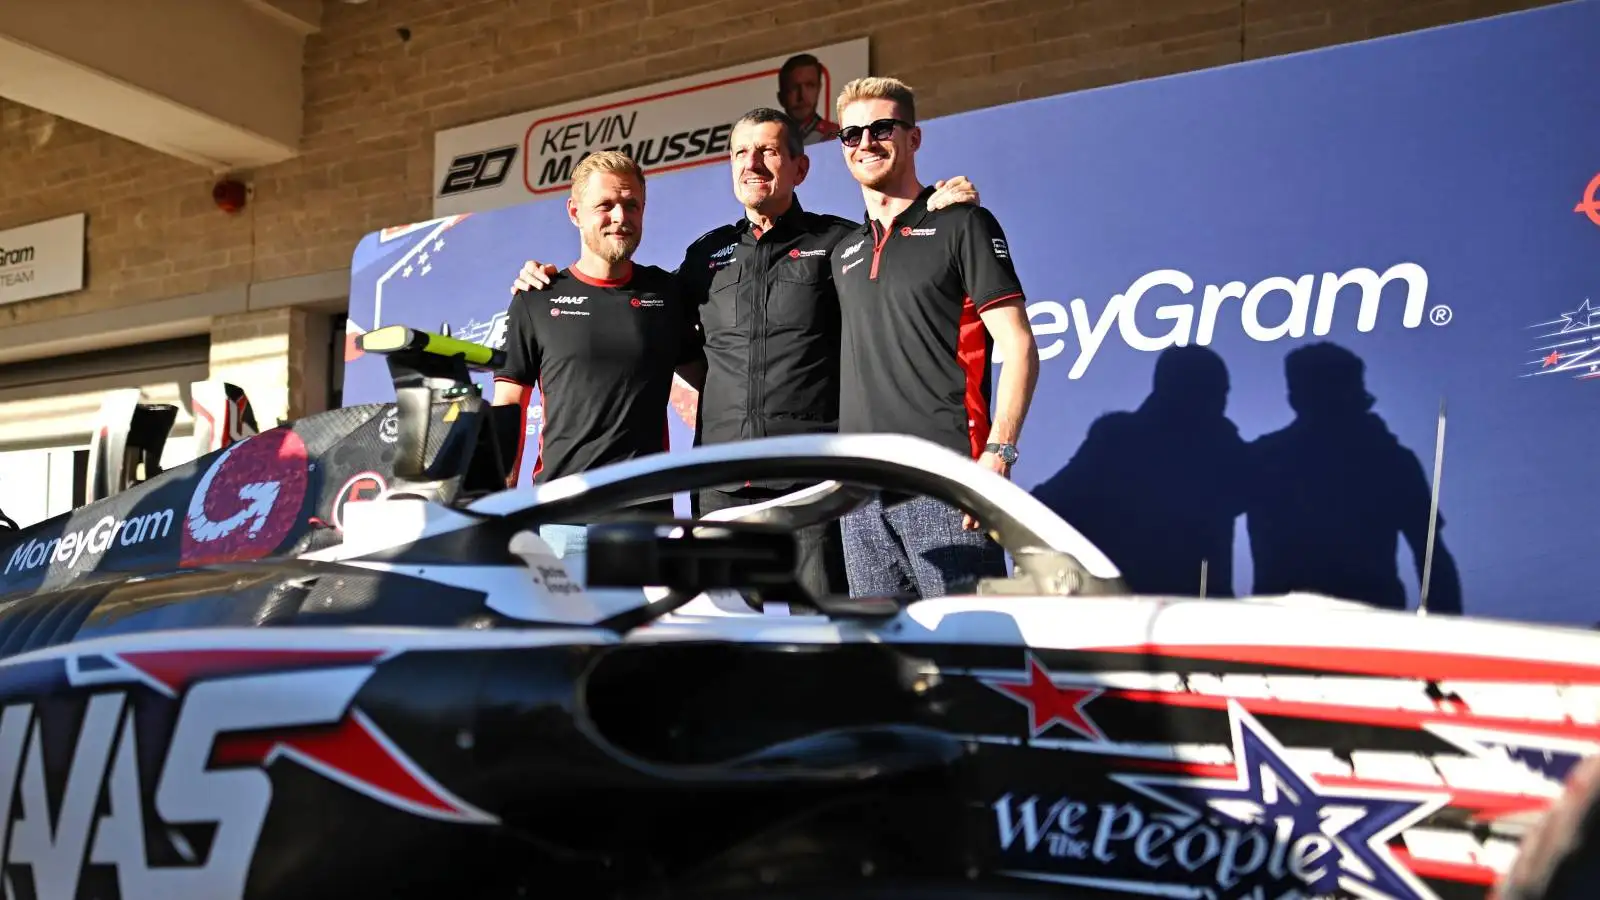 Haas drivers Kevin Magnussen and Nico Hulkenberg pose with former Haas team boss Guenther Steiner in front of the car.